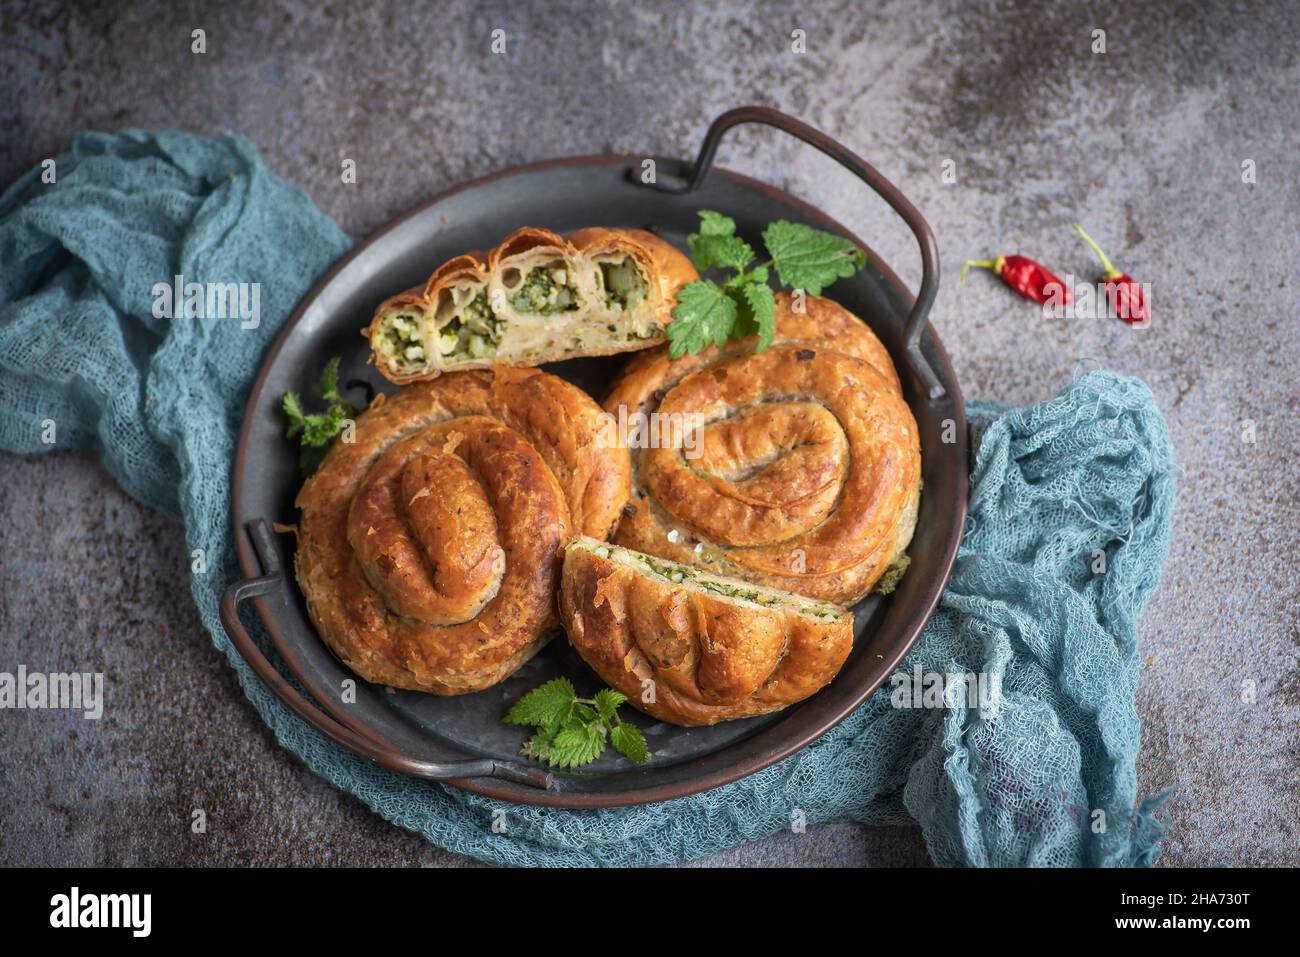 Homemade vegan mini pie with nettle plant in the shape of a snail on rustic gray background. Vegan food. Stock Photo